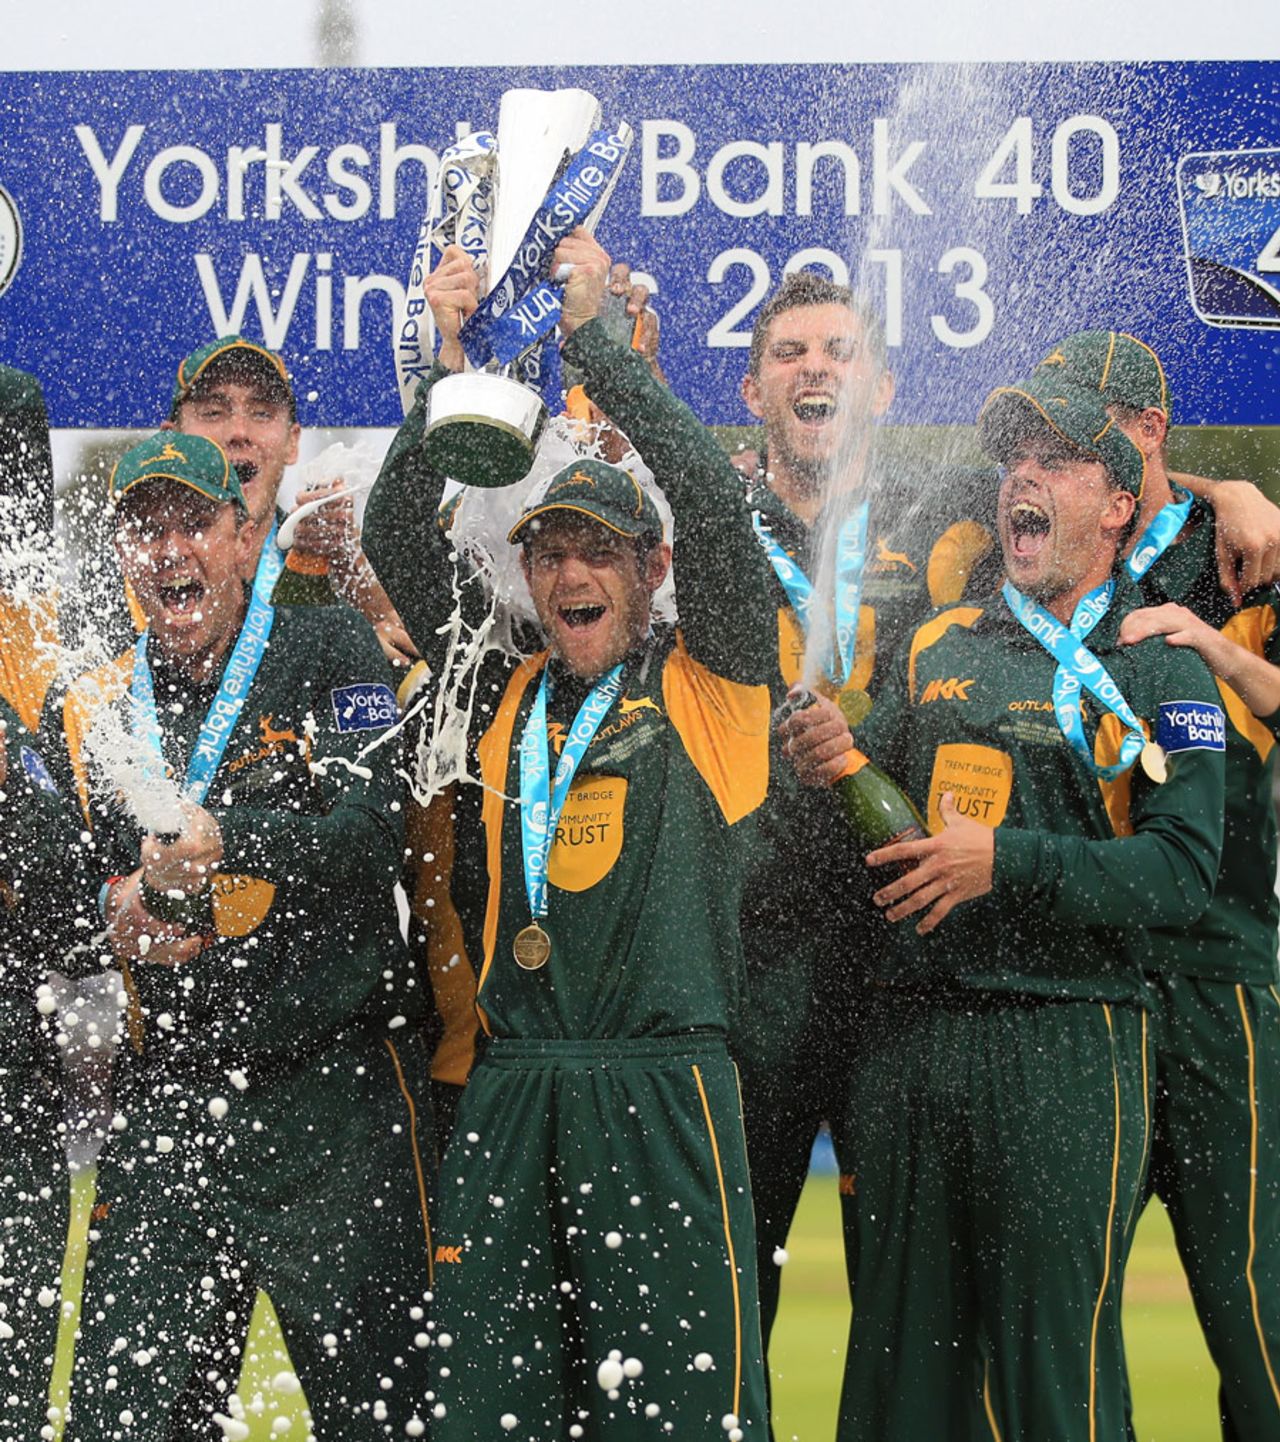 Chris Read lifts the YB40 trophy as the champagne corks pop, Glamorgan v Nottinghamshire, YB40 final, Lord's, September 21, 2013